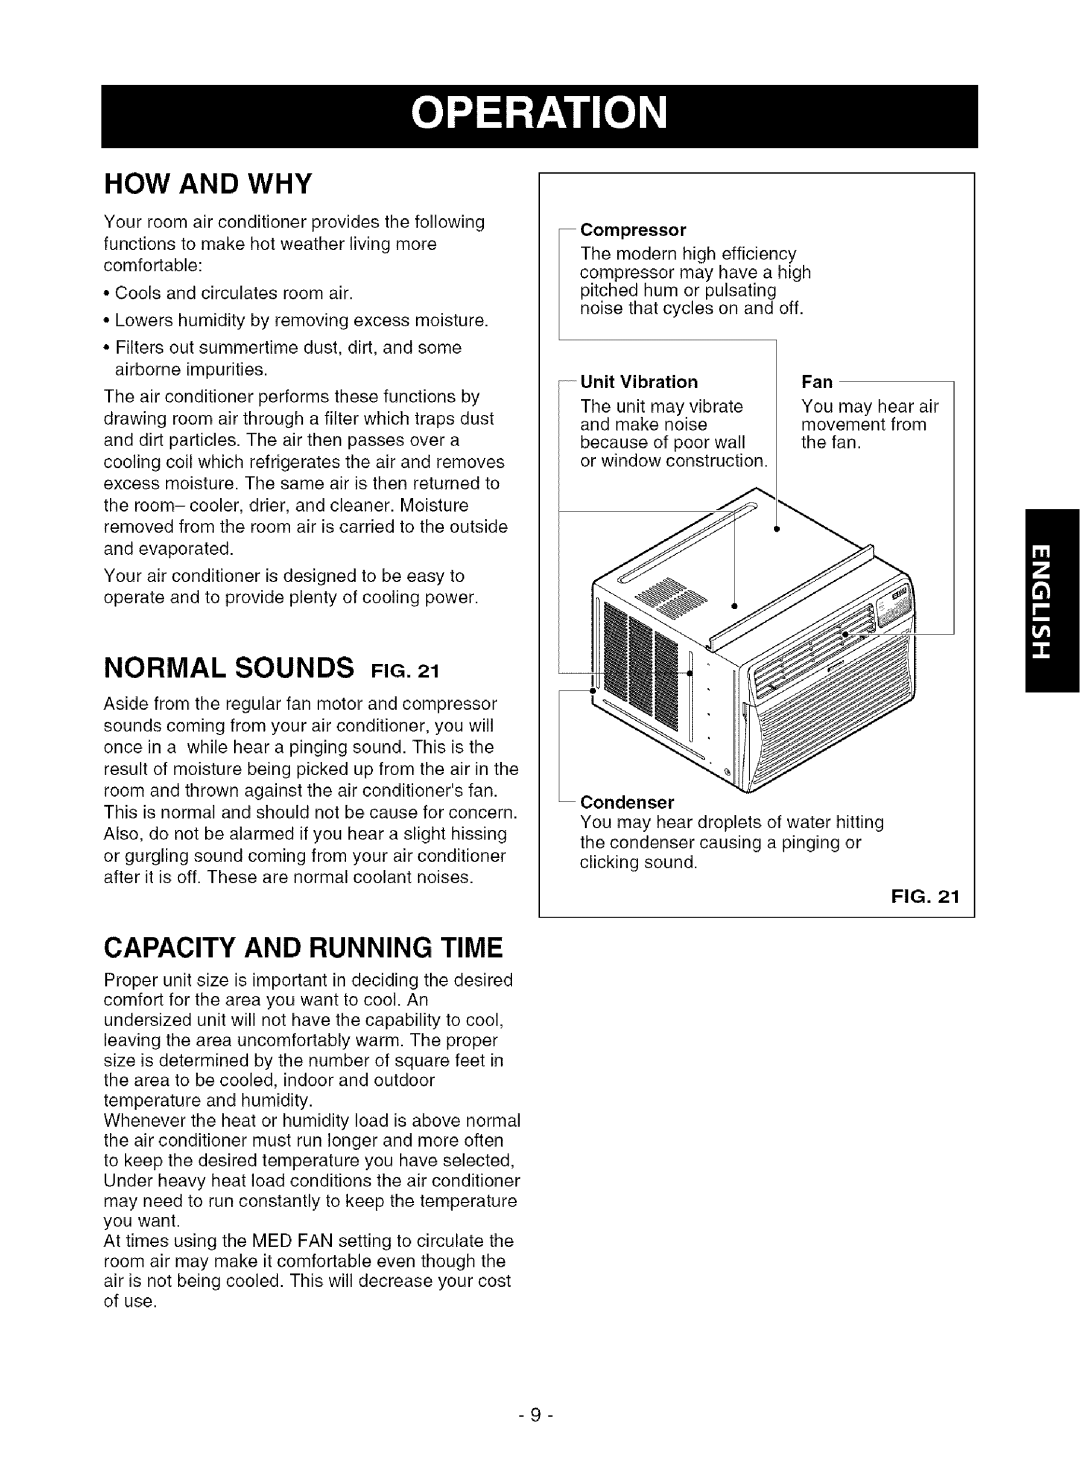 Kenmore 580.75281 owner manual How And Why, Normal Sounds, Capacity And Running Time, Compressor, Unit Vibration 